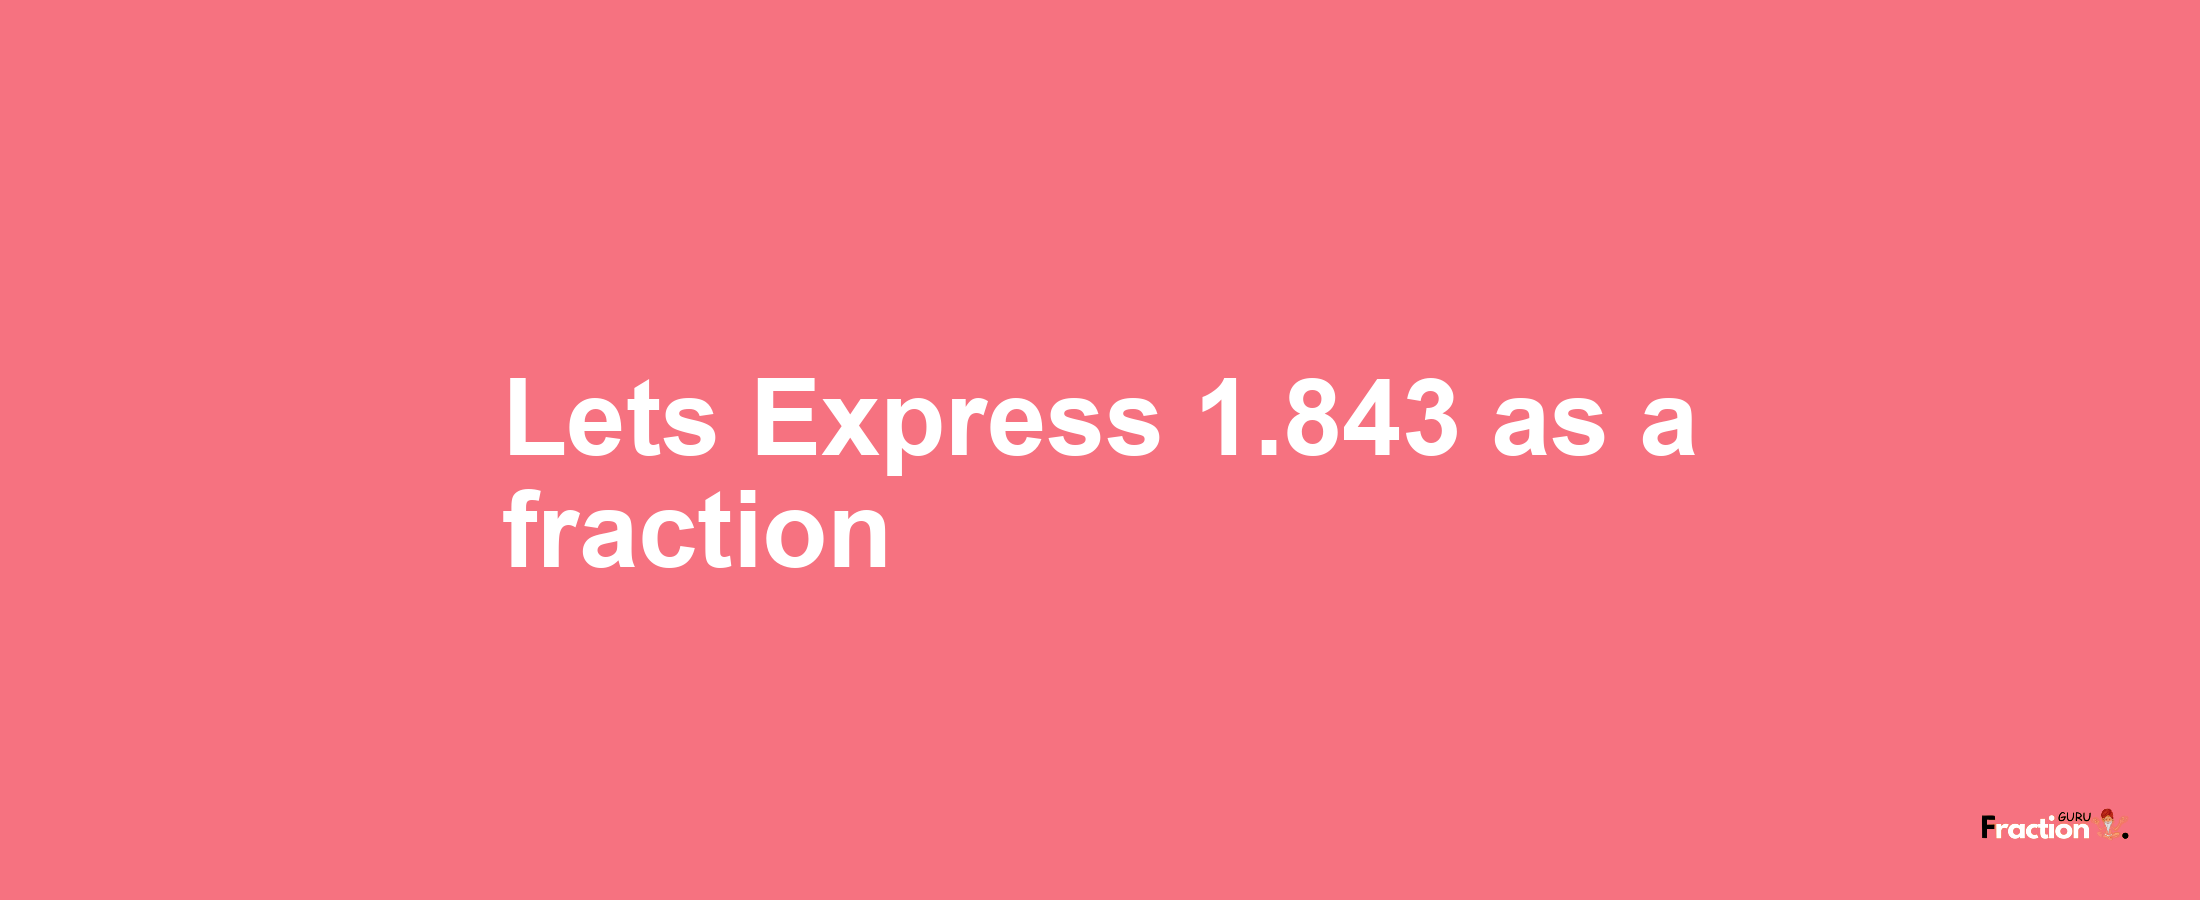 Lets Express 1.843 as afraction